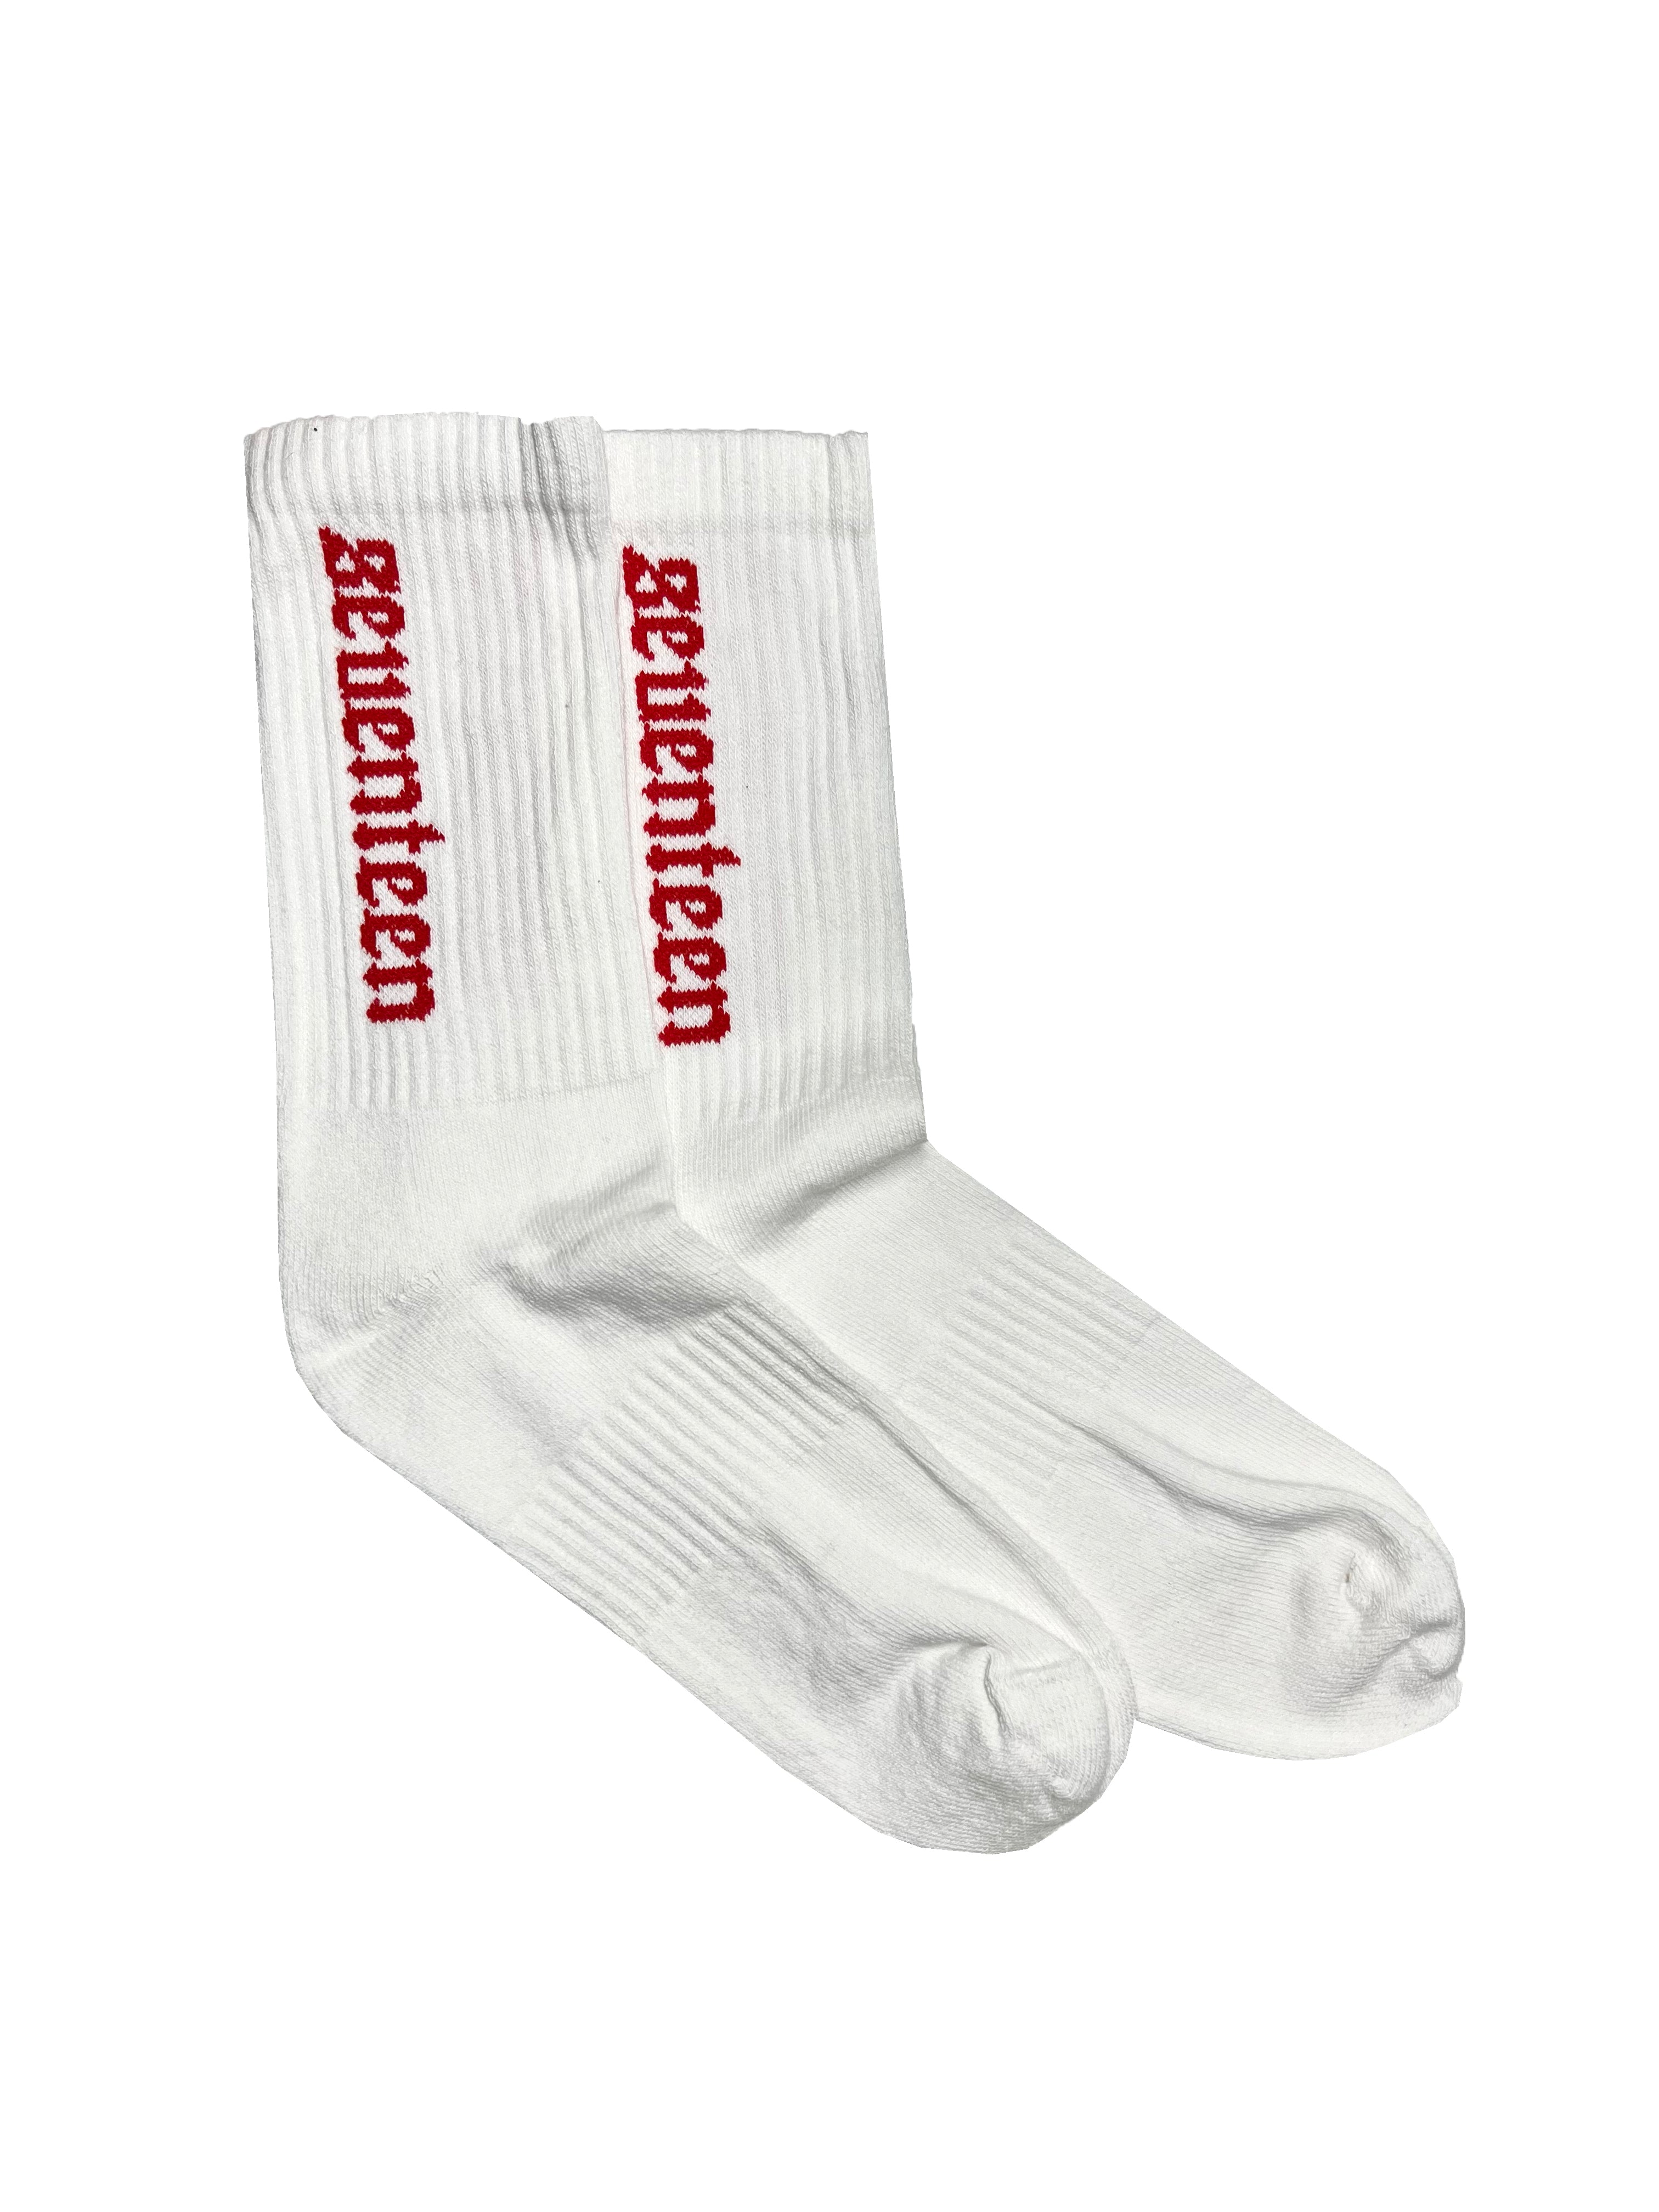 Seventeen white socks with red logo